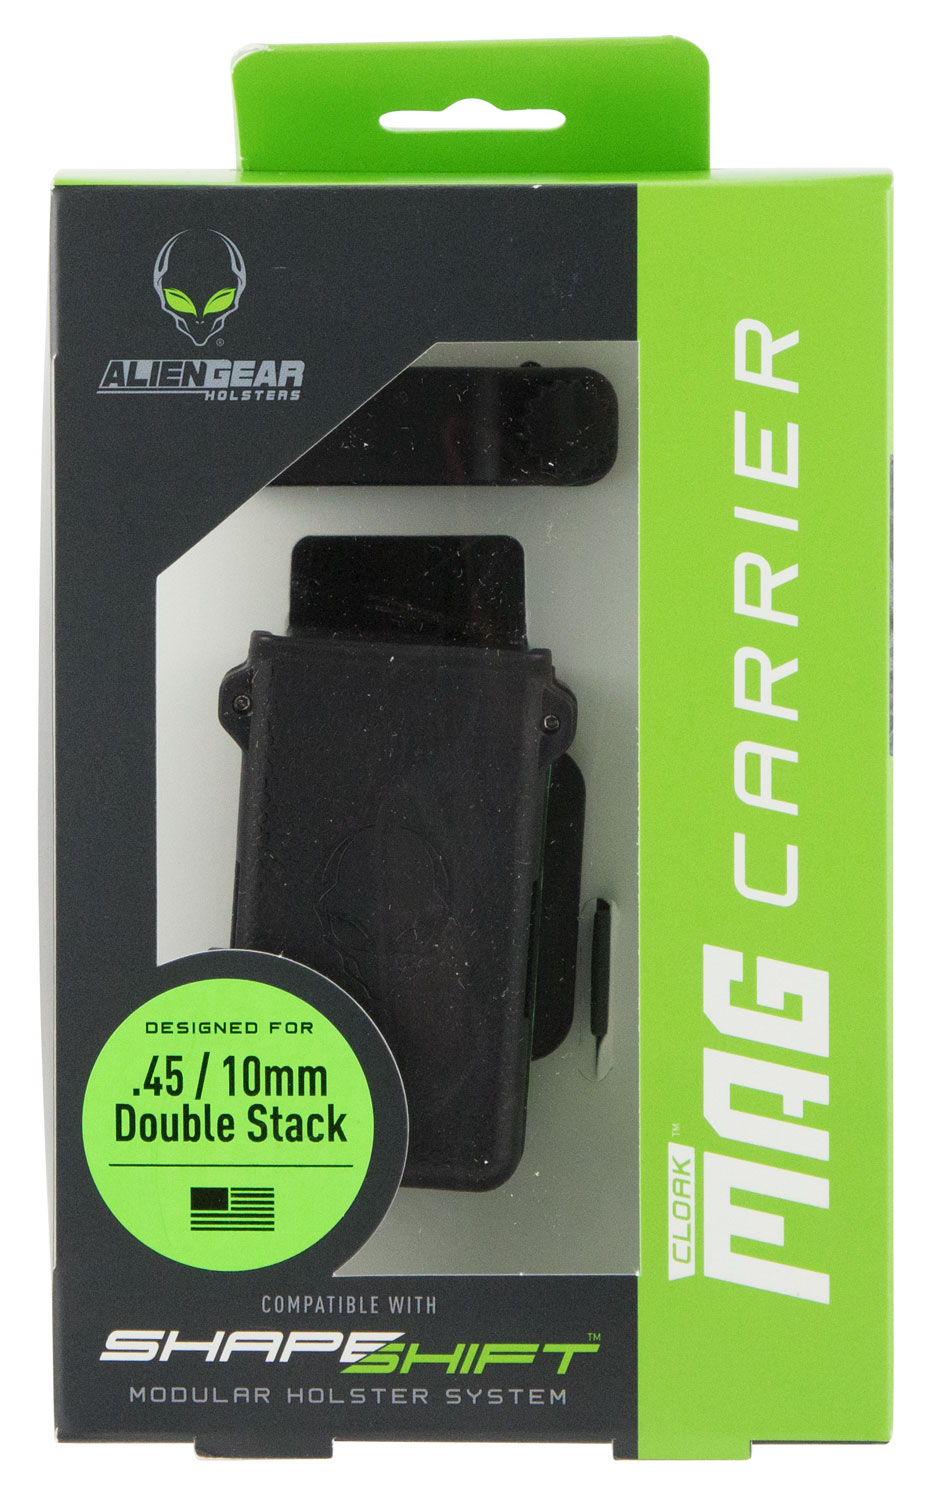 Alien Gear Holsters CMCS5 Cloak Mag Carrier Single Black Polymer Paper Compatible w/ Double Stack Compatible w/ Alien Gear Shape Shift Modular Holster System